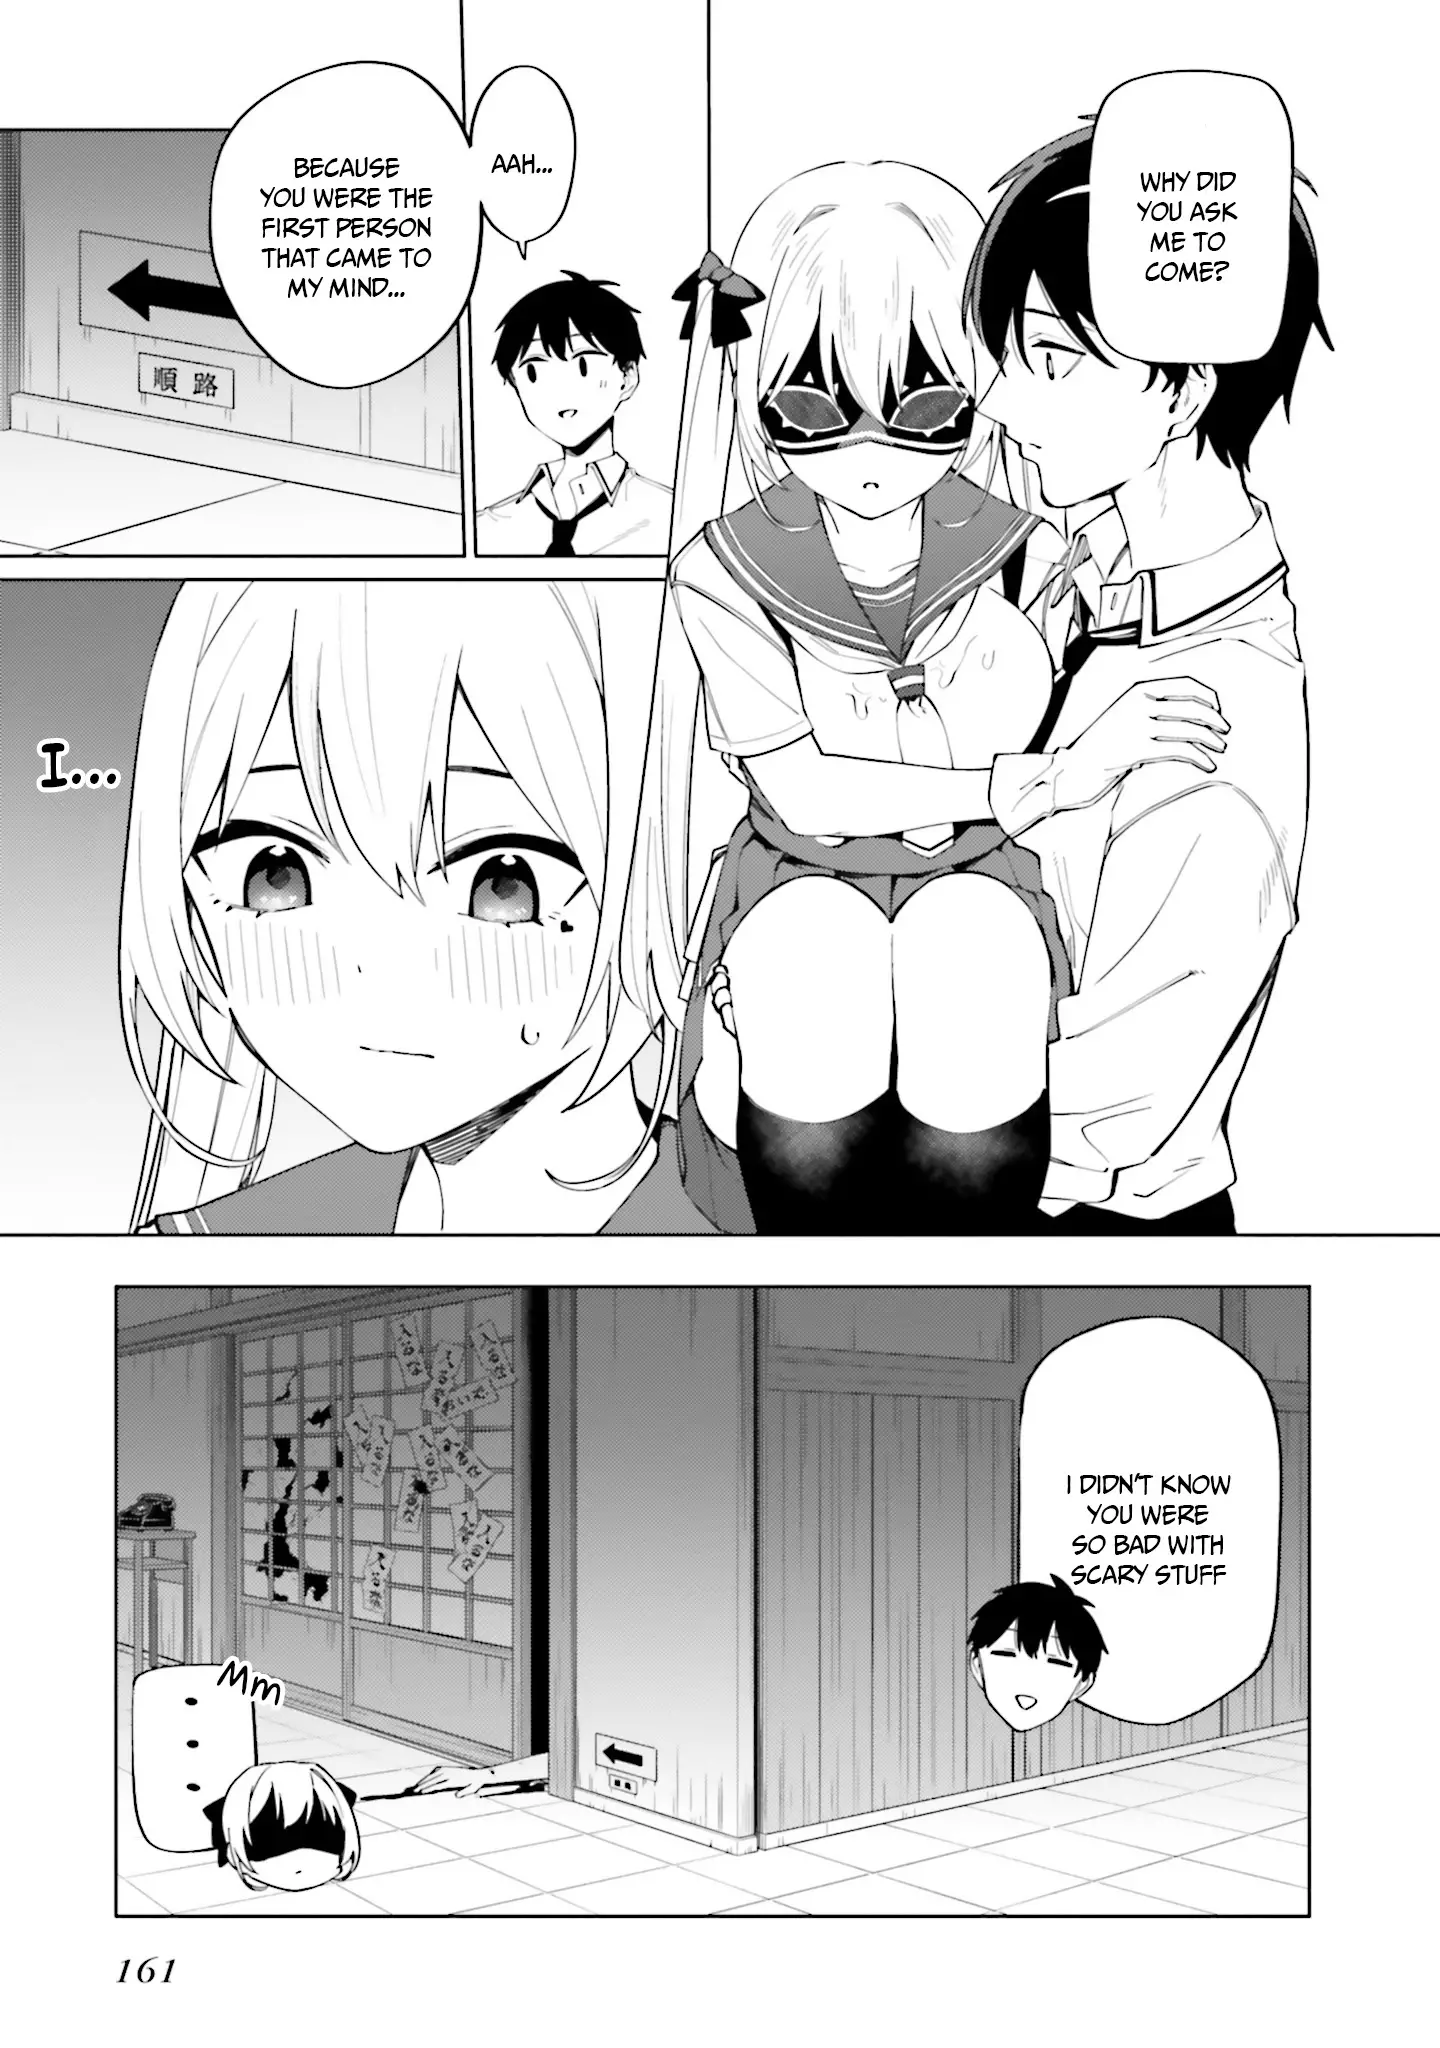 I Don't Understand Shirogane-San's Facial Expression At All - 12 page 22-1072ca5f